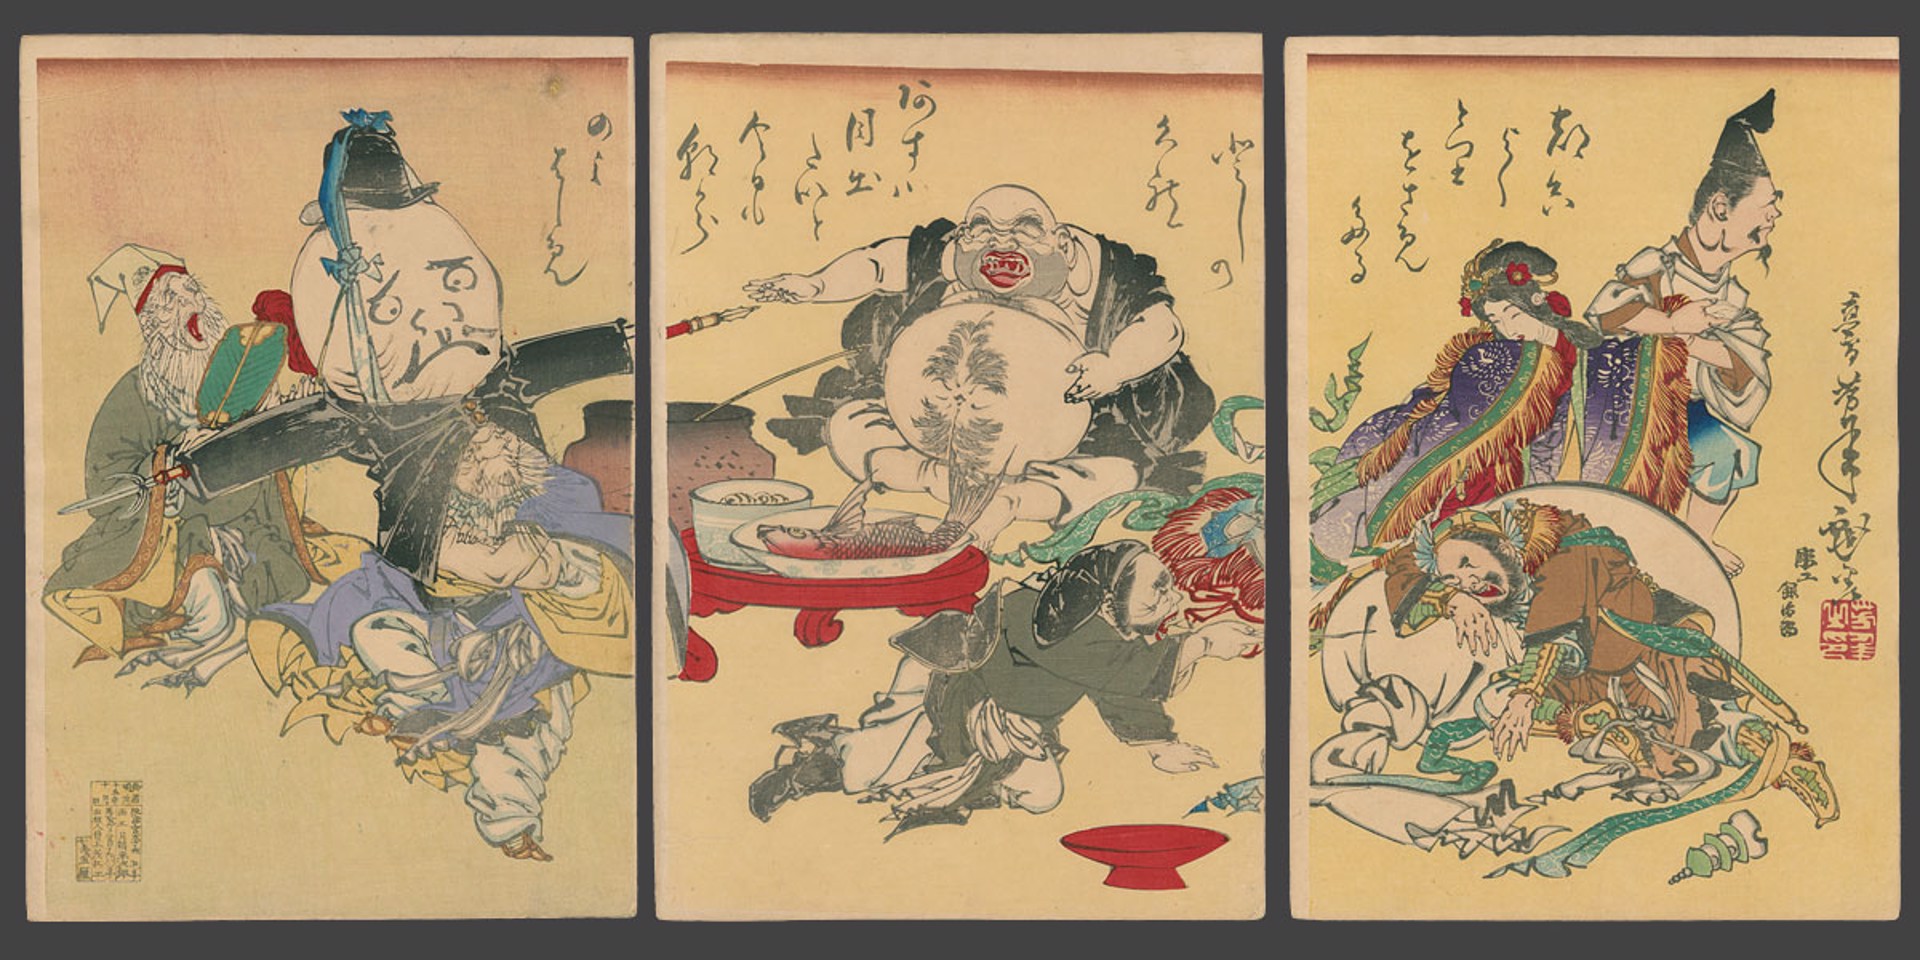 A Comic Entertainment of the Seven Lucky Gods by Yoshitoshi